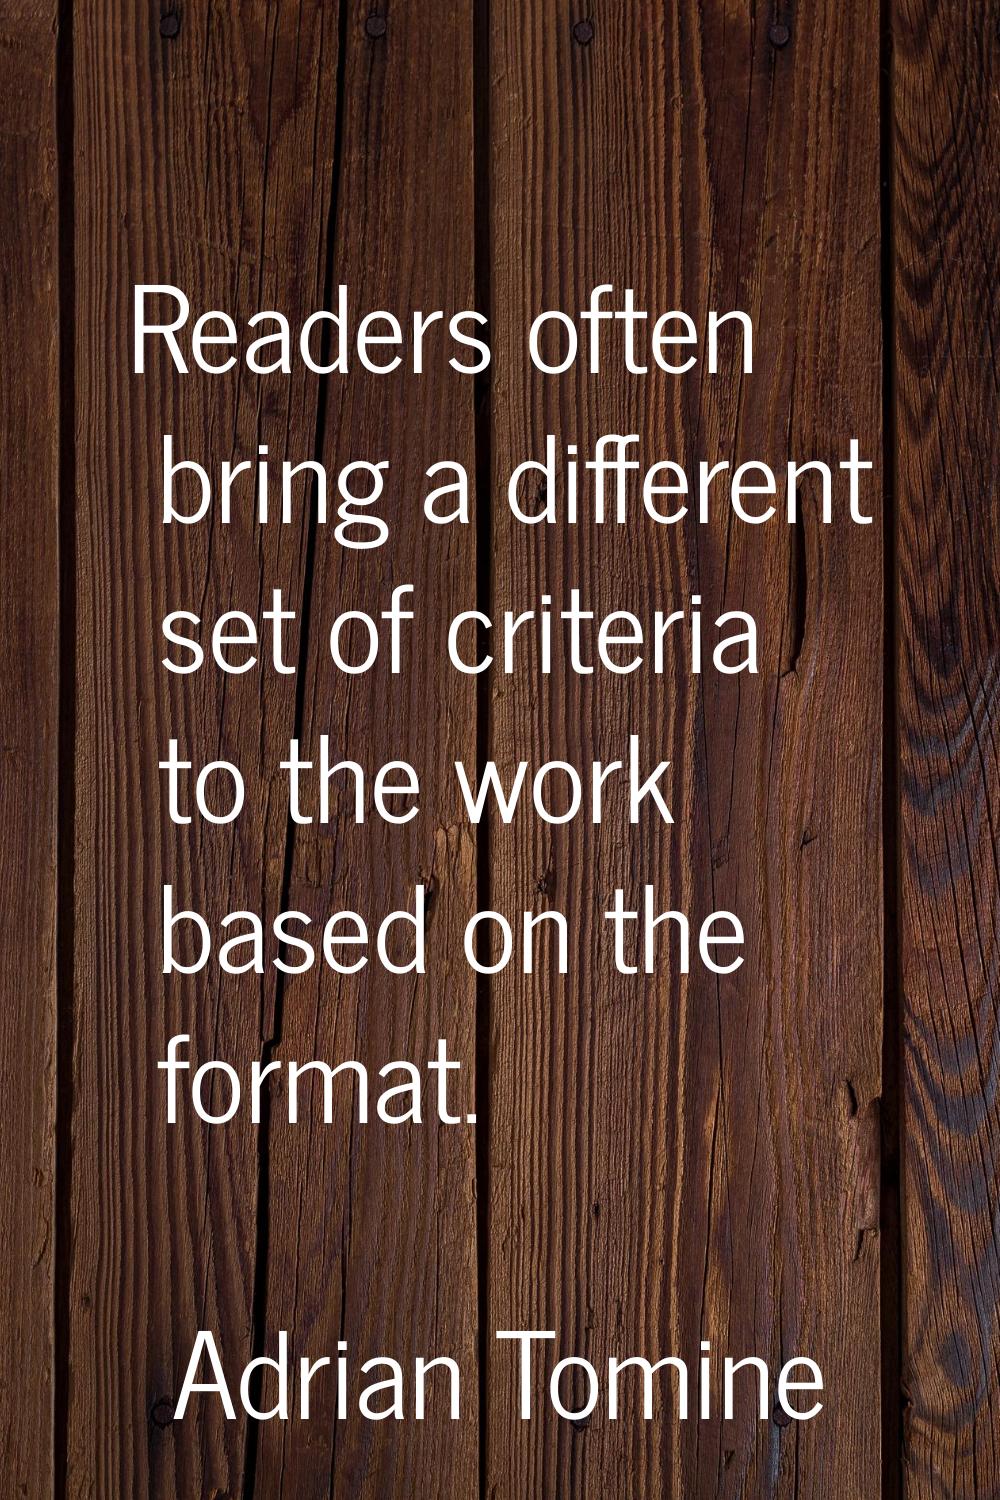 Readers often bring a different set of criteria to the work based on the format.